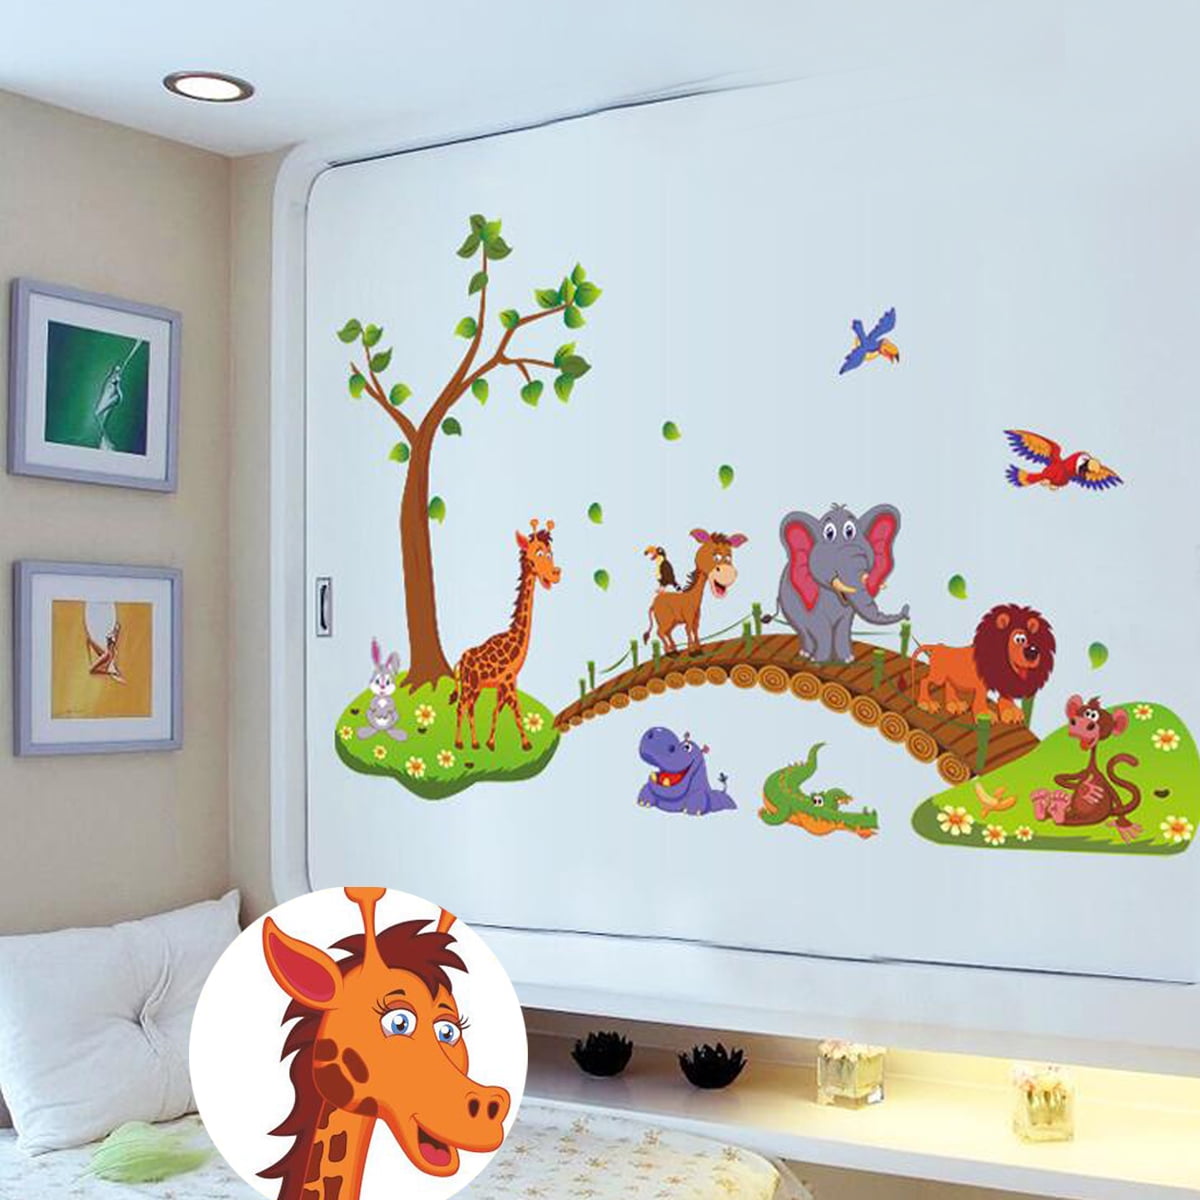 DIY Home Decor Removable Vinyl Animal World Map Wall Stickers For Kids Room 